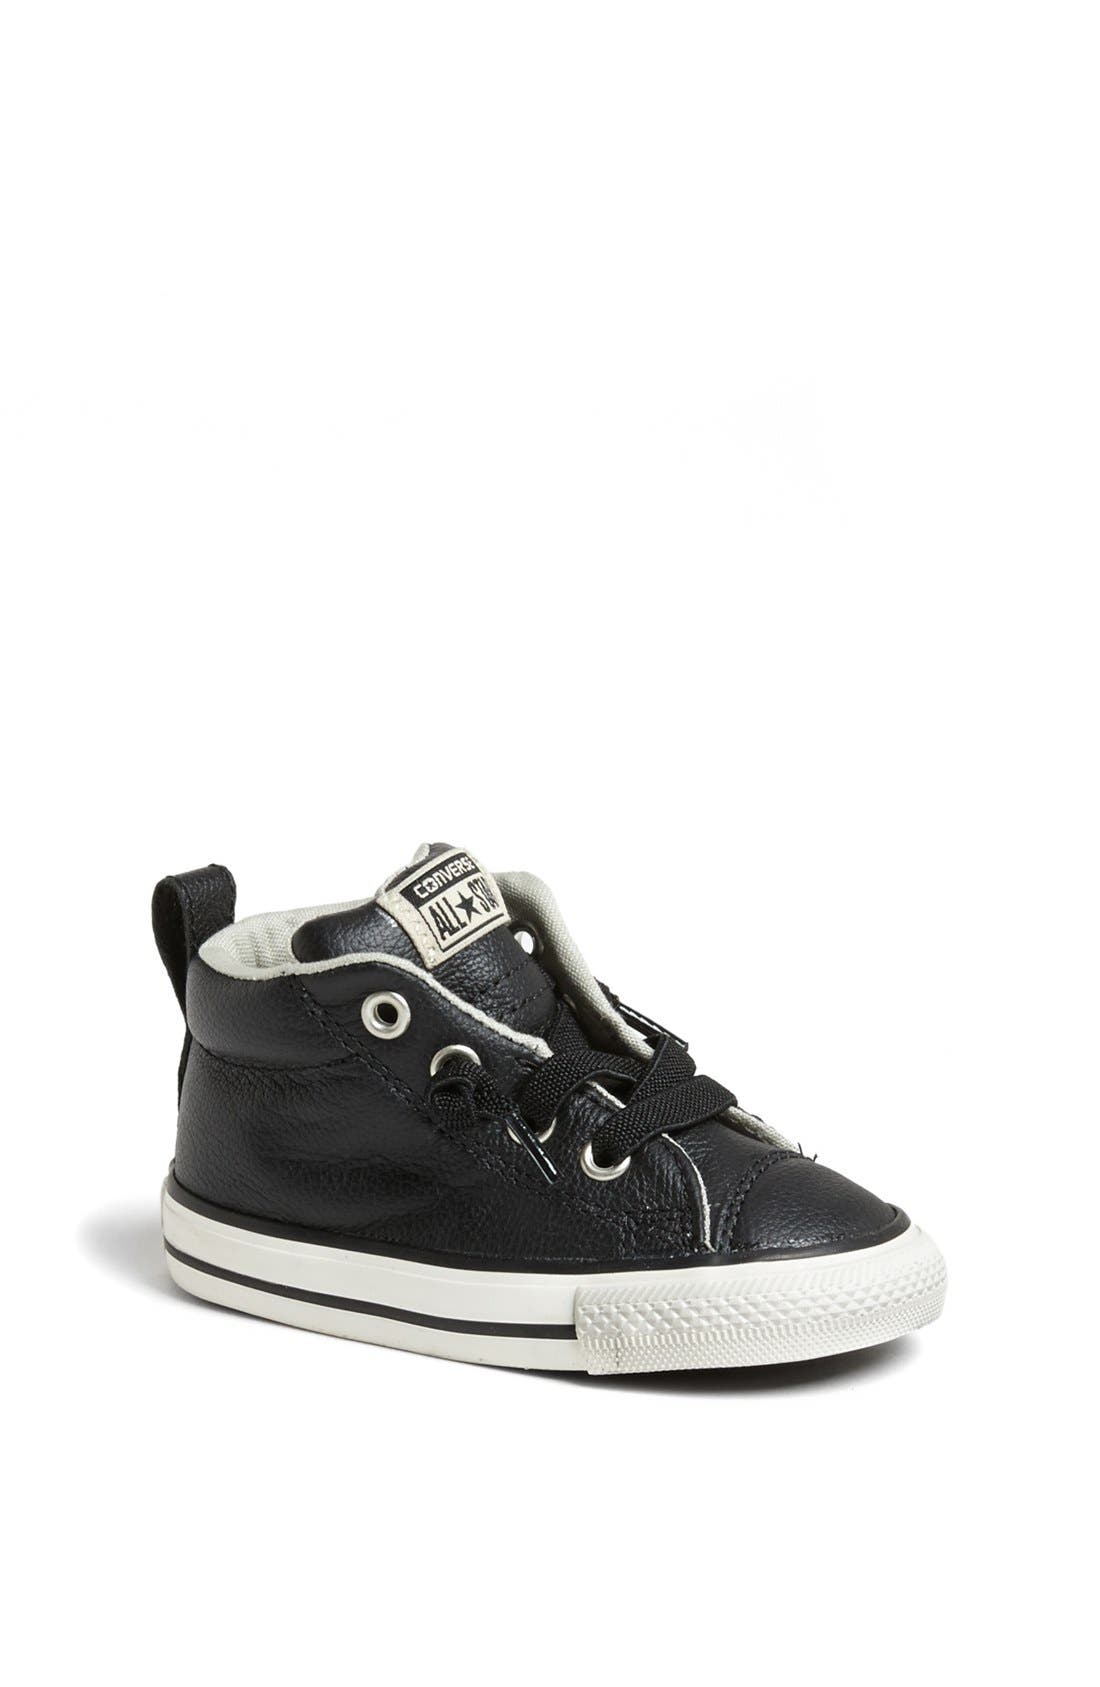 black leather converse for toddlers